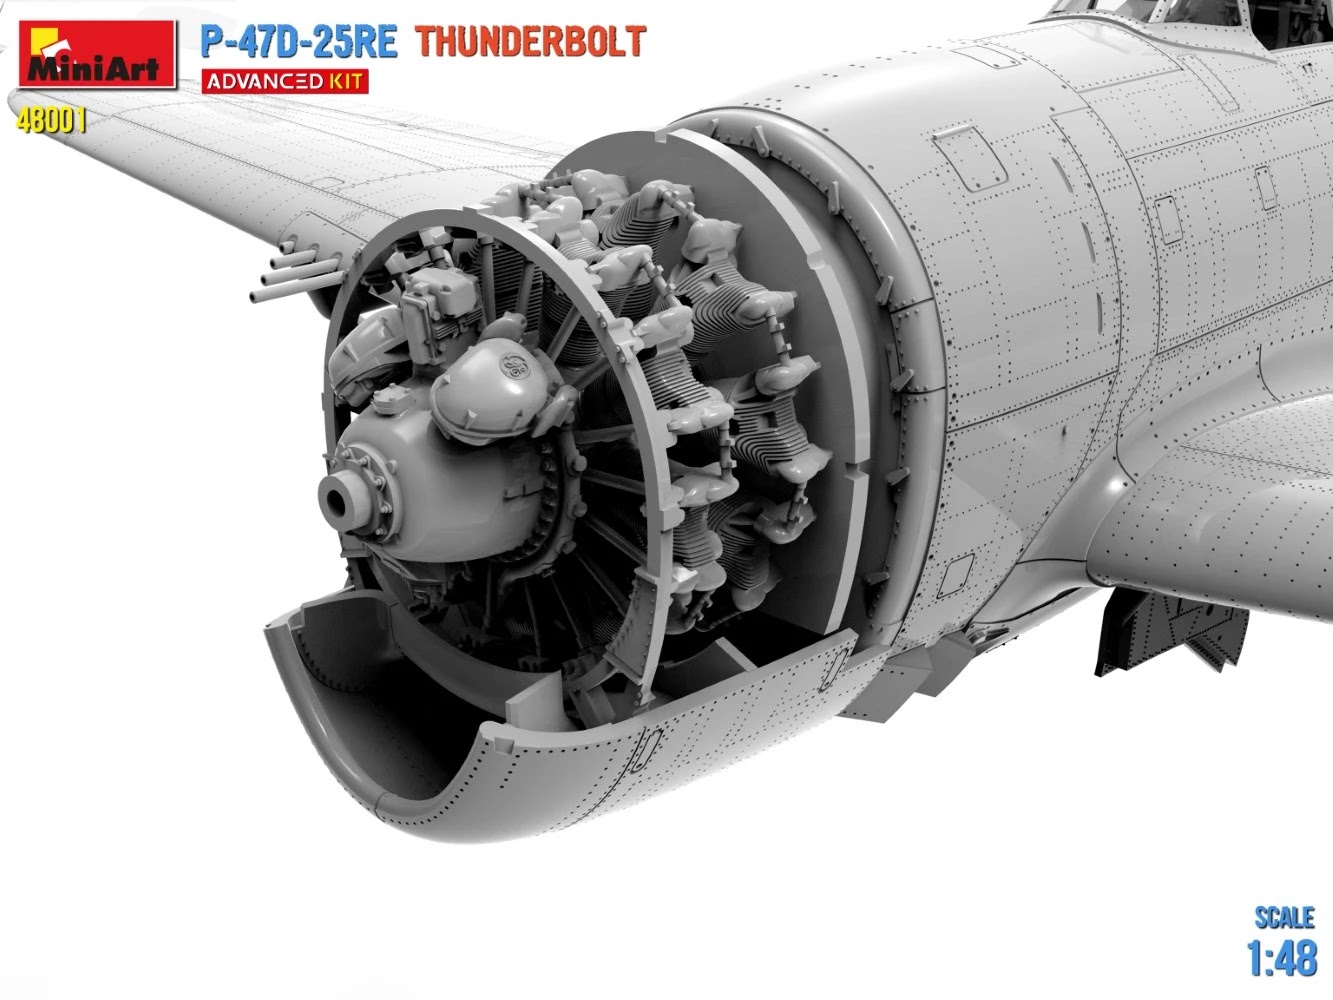 MiniArt ups the detail on their P-47D CAD Engine Detail-3